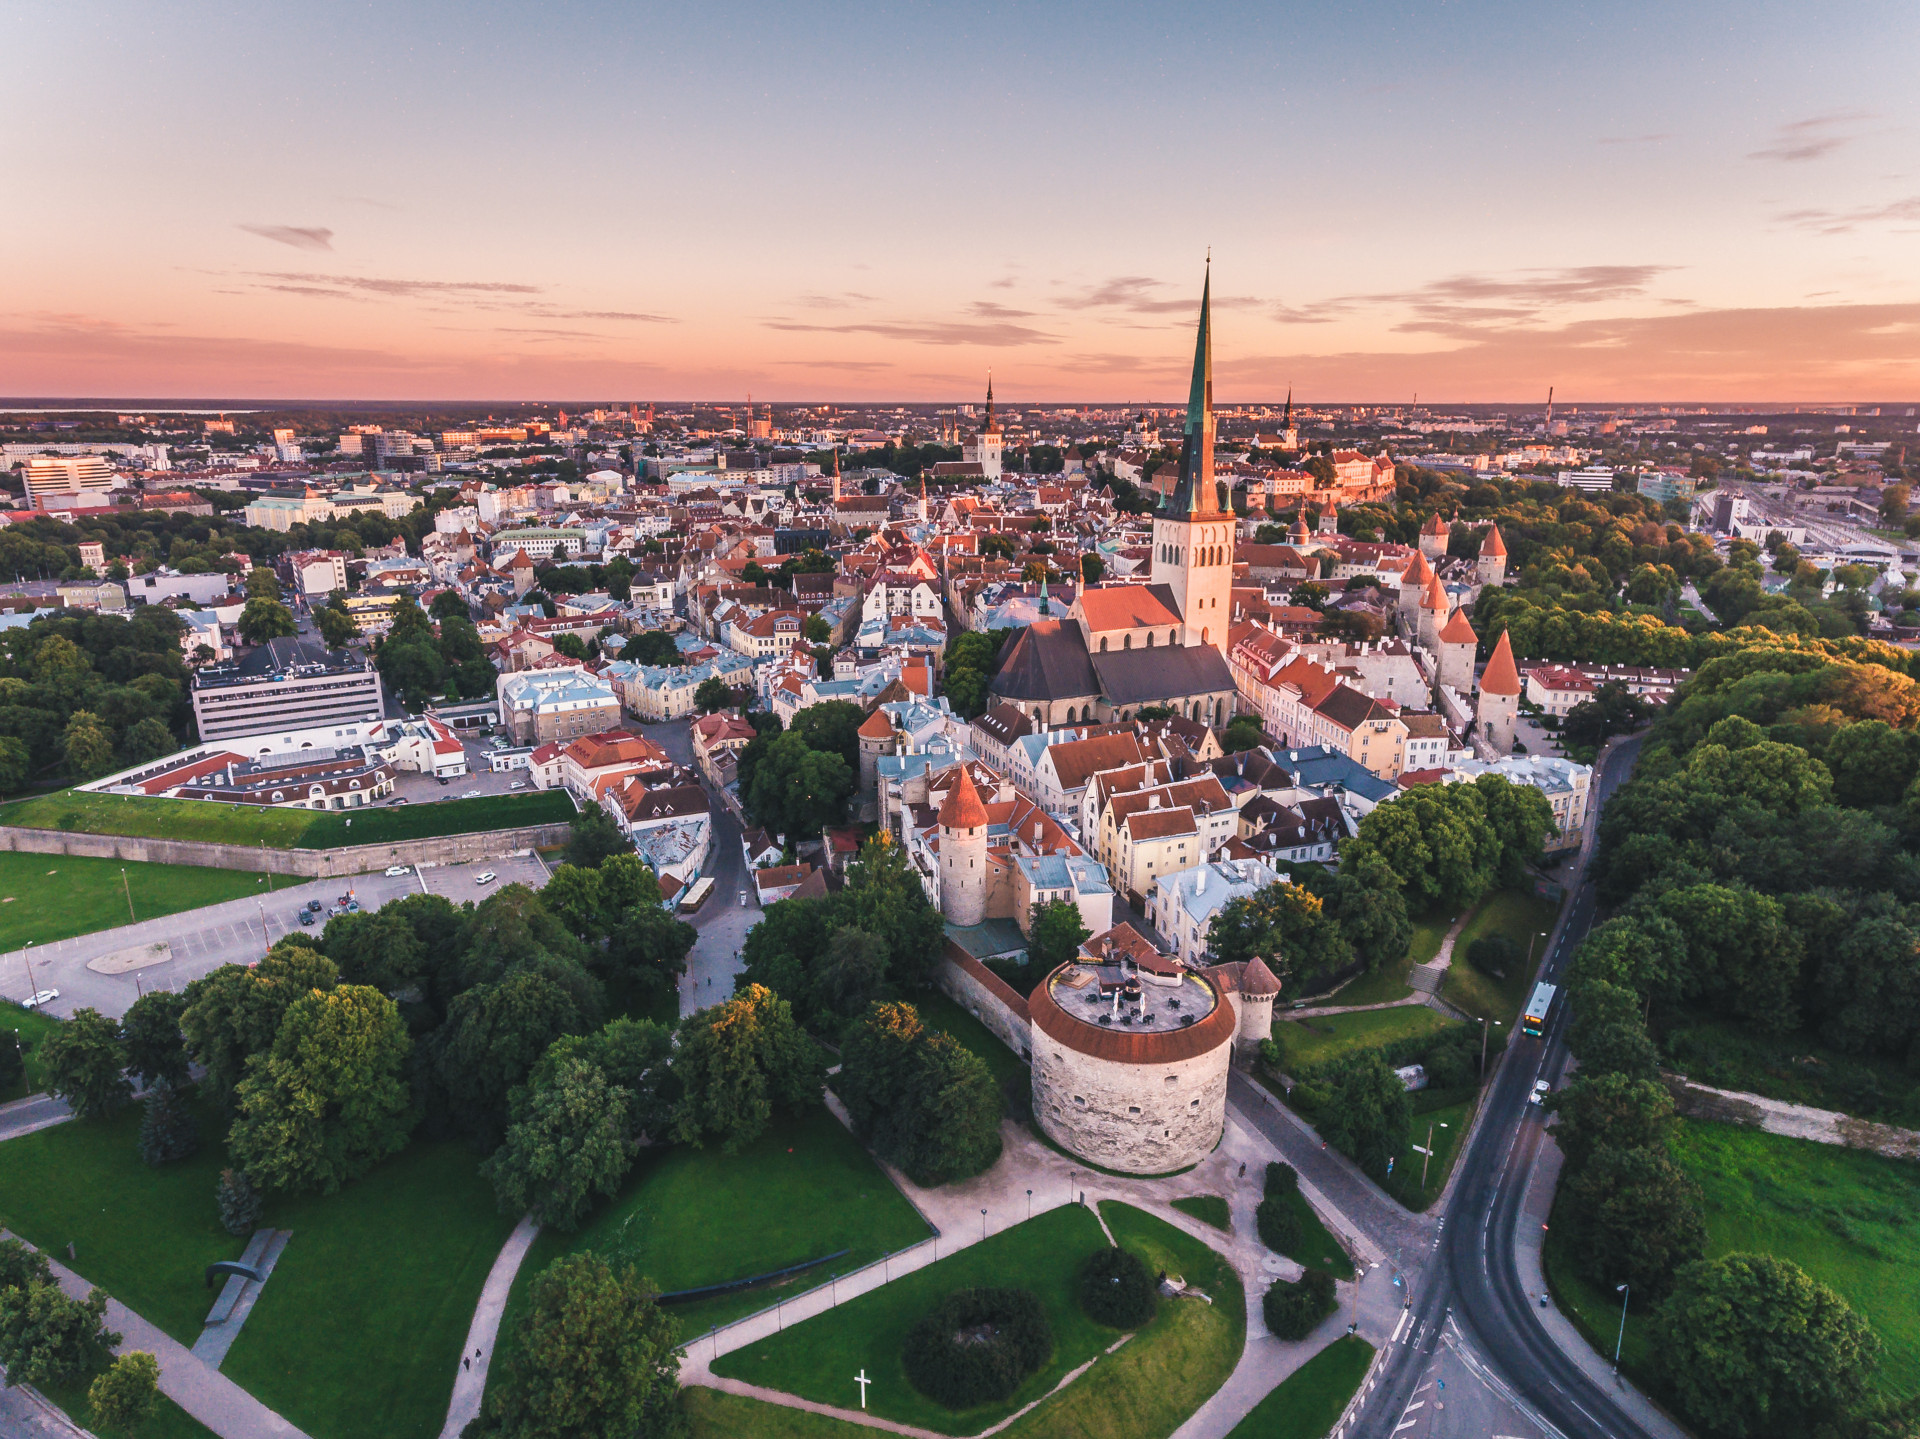 After a short flight lasting only 40 minutes, you could ideally find yourself stepping out of your plane into Tallinn, the capital city of Estonia.<p>You may also like:<a href="https://www.starsinsider.com/n/243159?utm_source=msn.com&utm_medium=display&utm_campaign=referral_description&utm_content=701330en-us"> Believe it or not: People who returned from the dead</a></p>